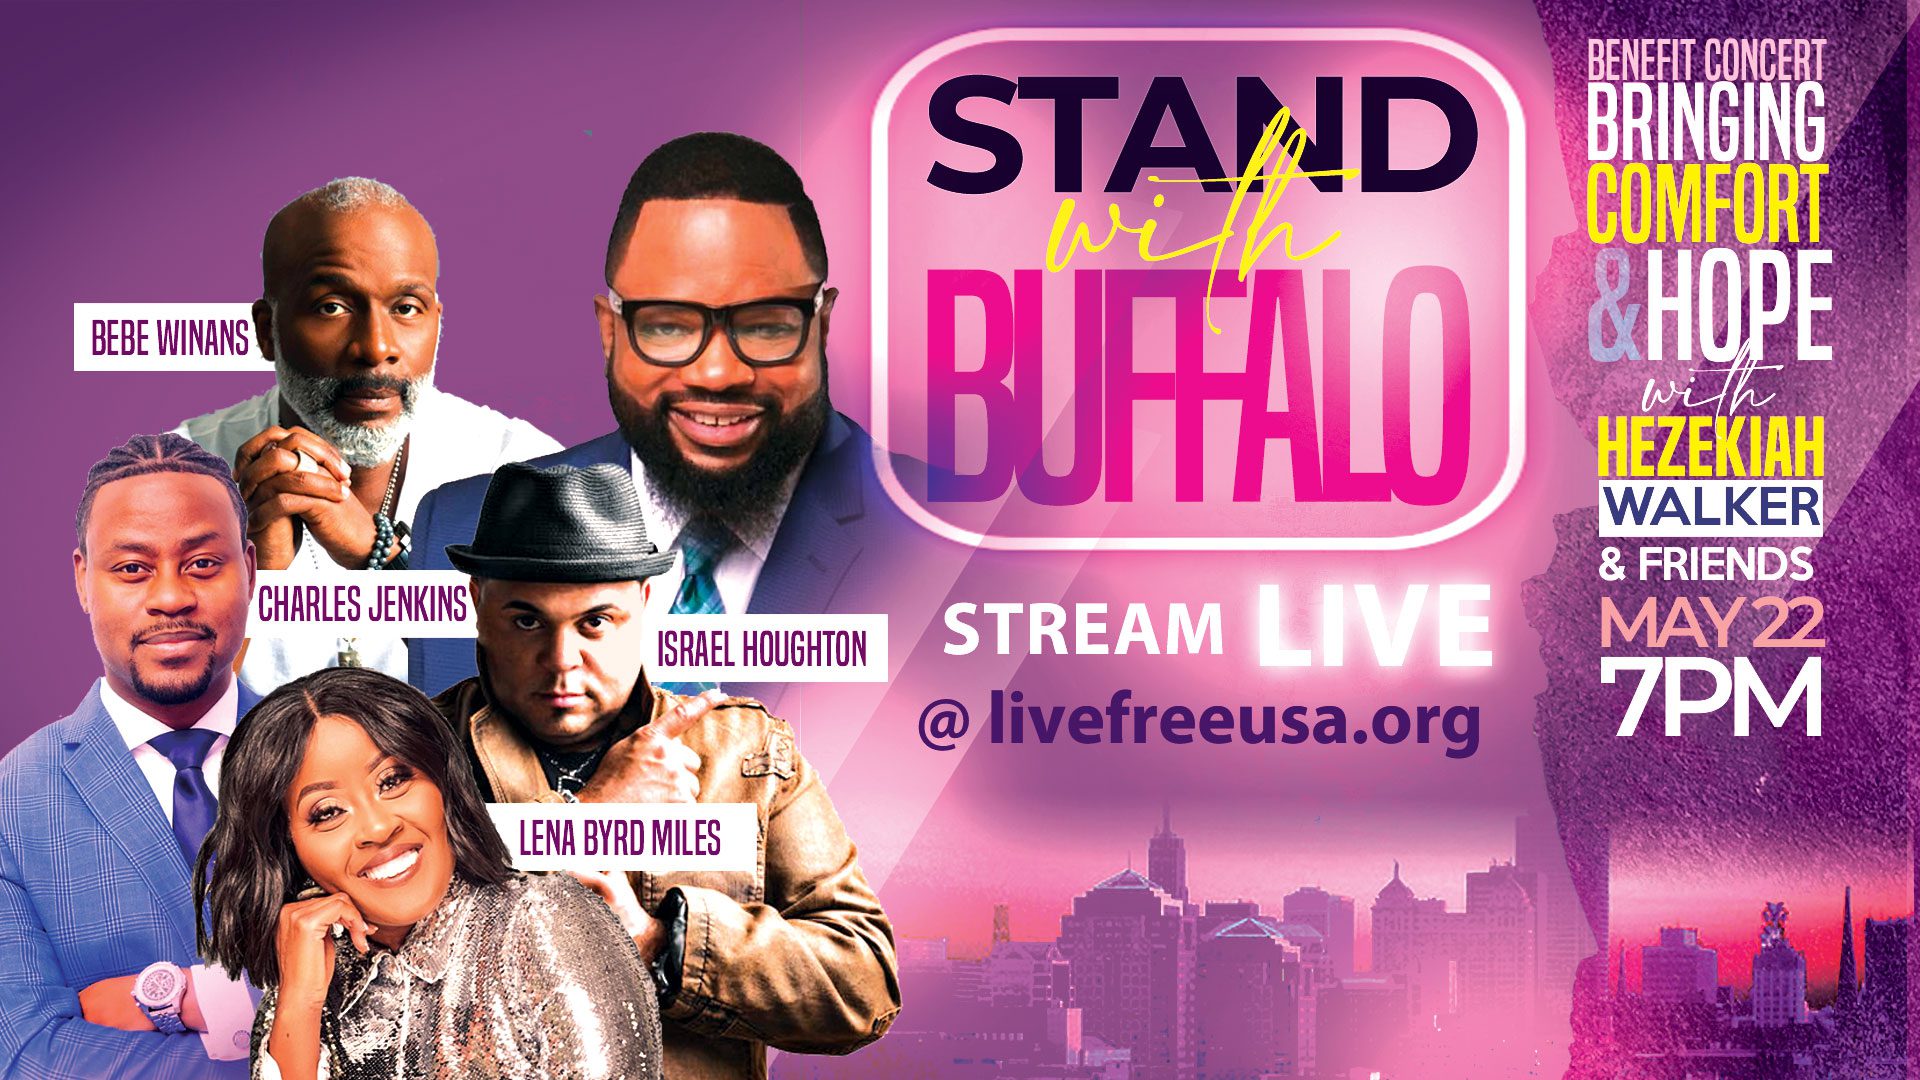 LIVE FREE to Host Stand with Buffalo Inspirational Concert to Help Bring Comfort and Hope to Buffalo, New York